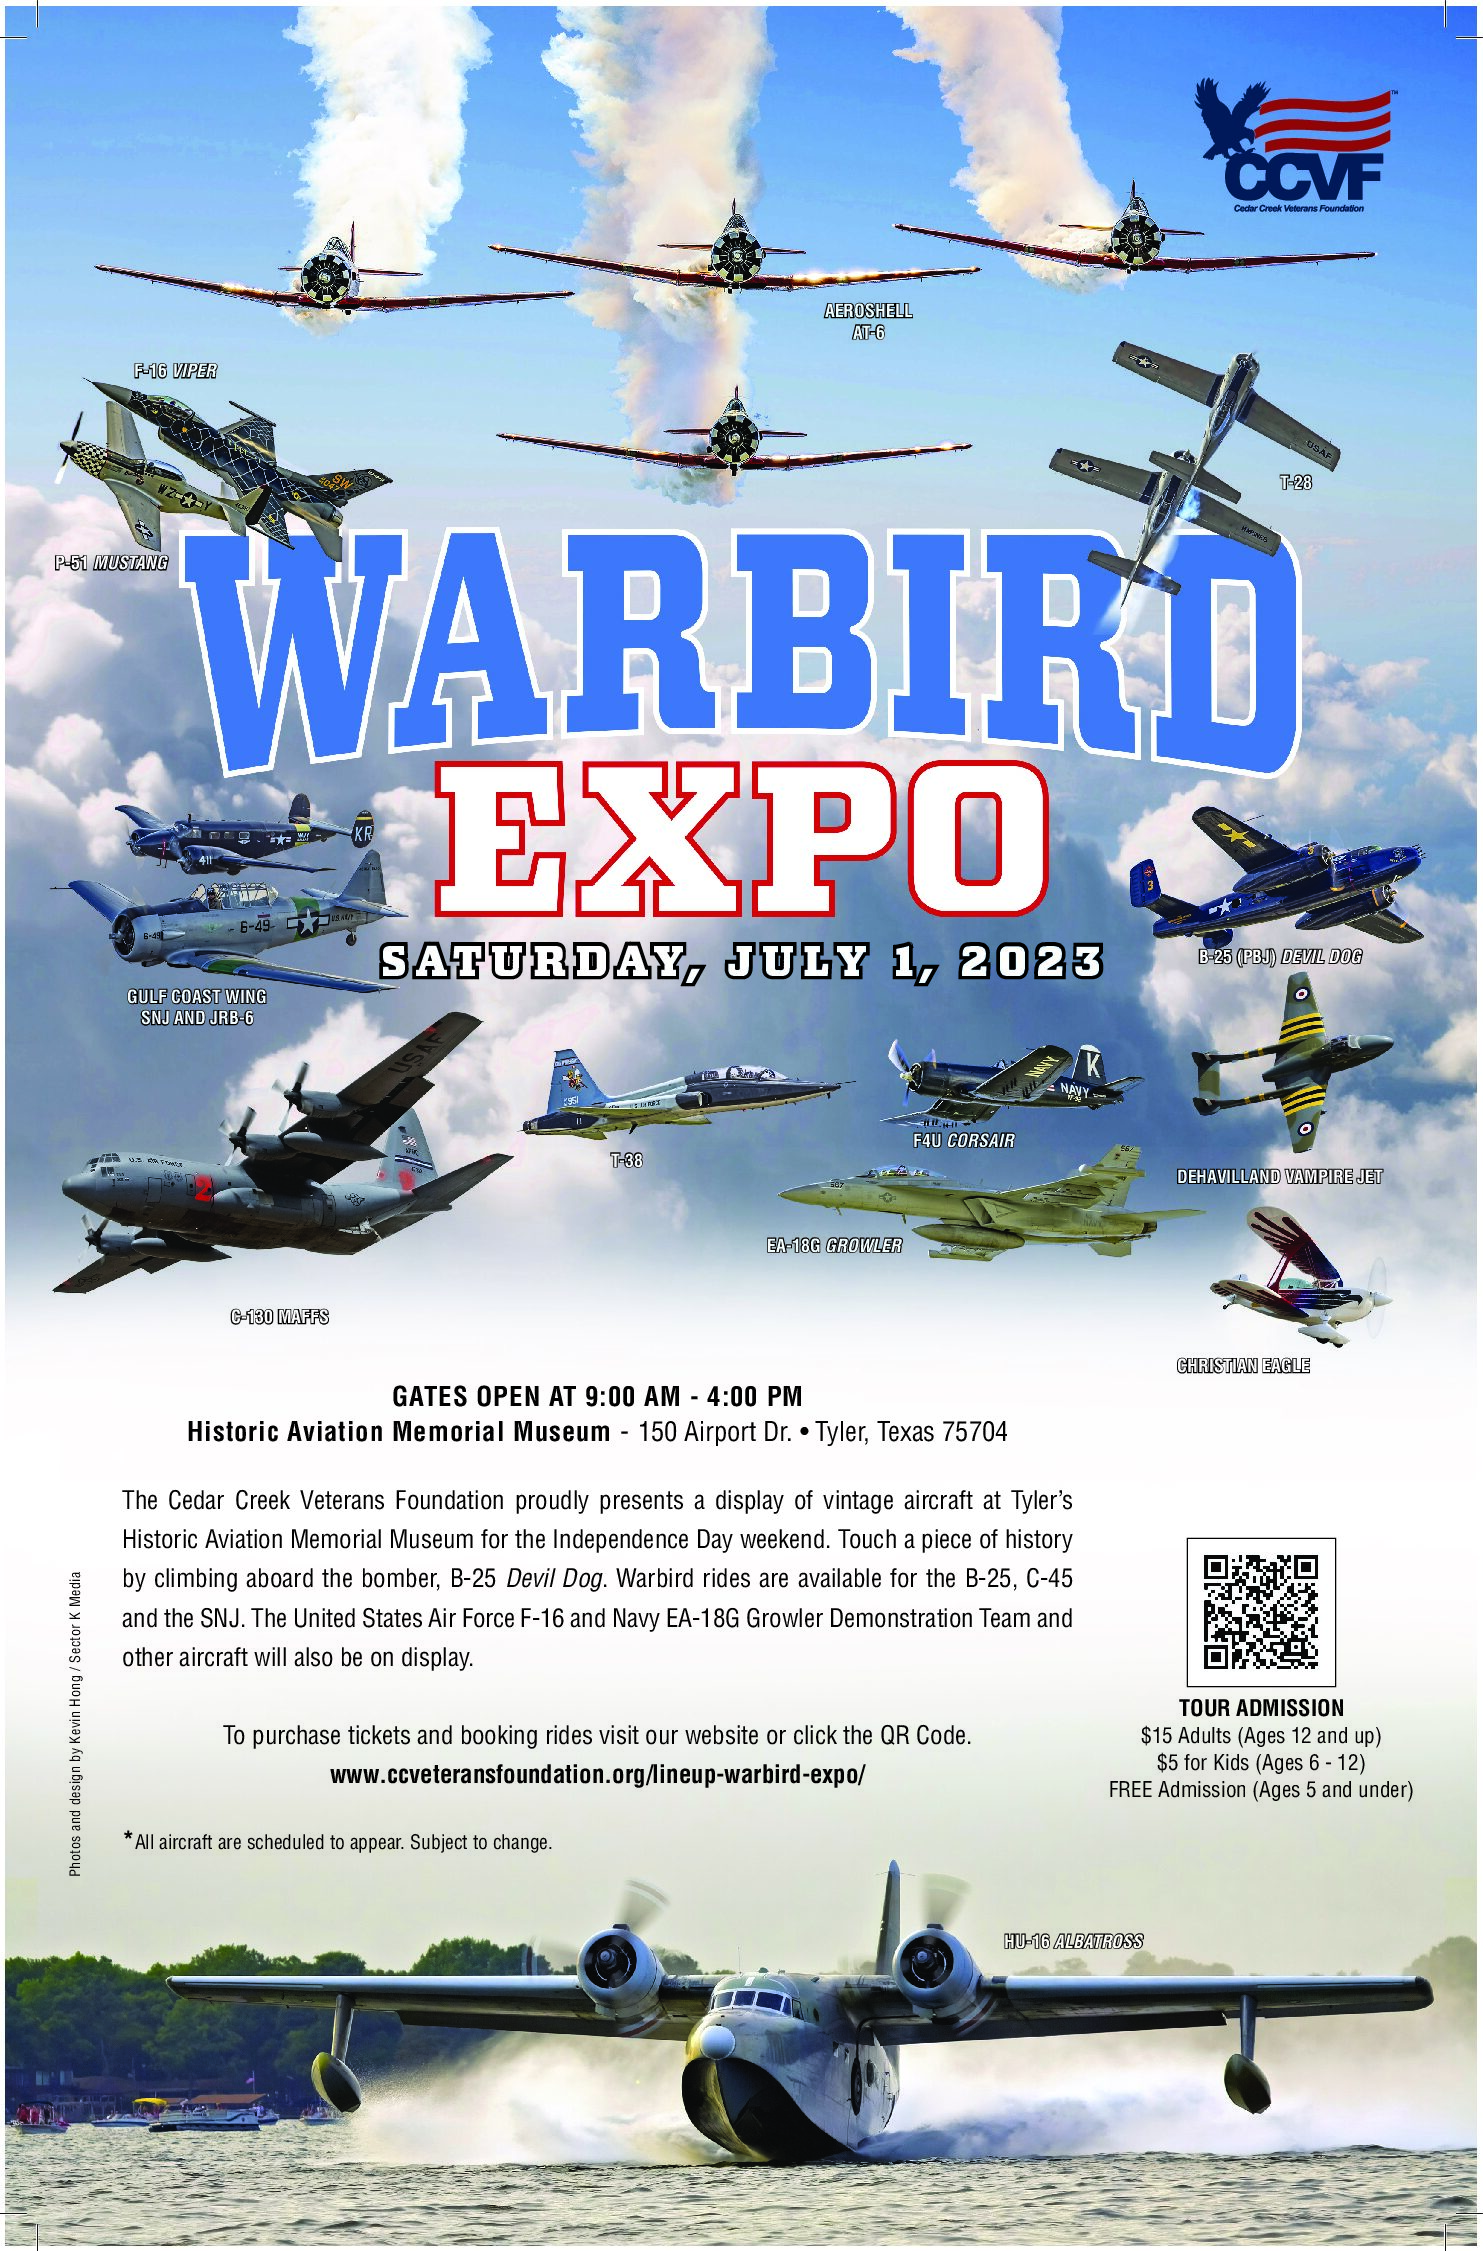 The Magnificent Warbird Expo